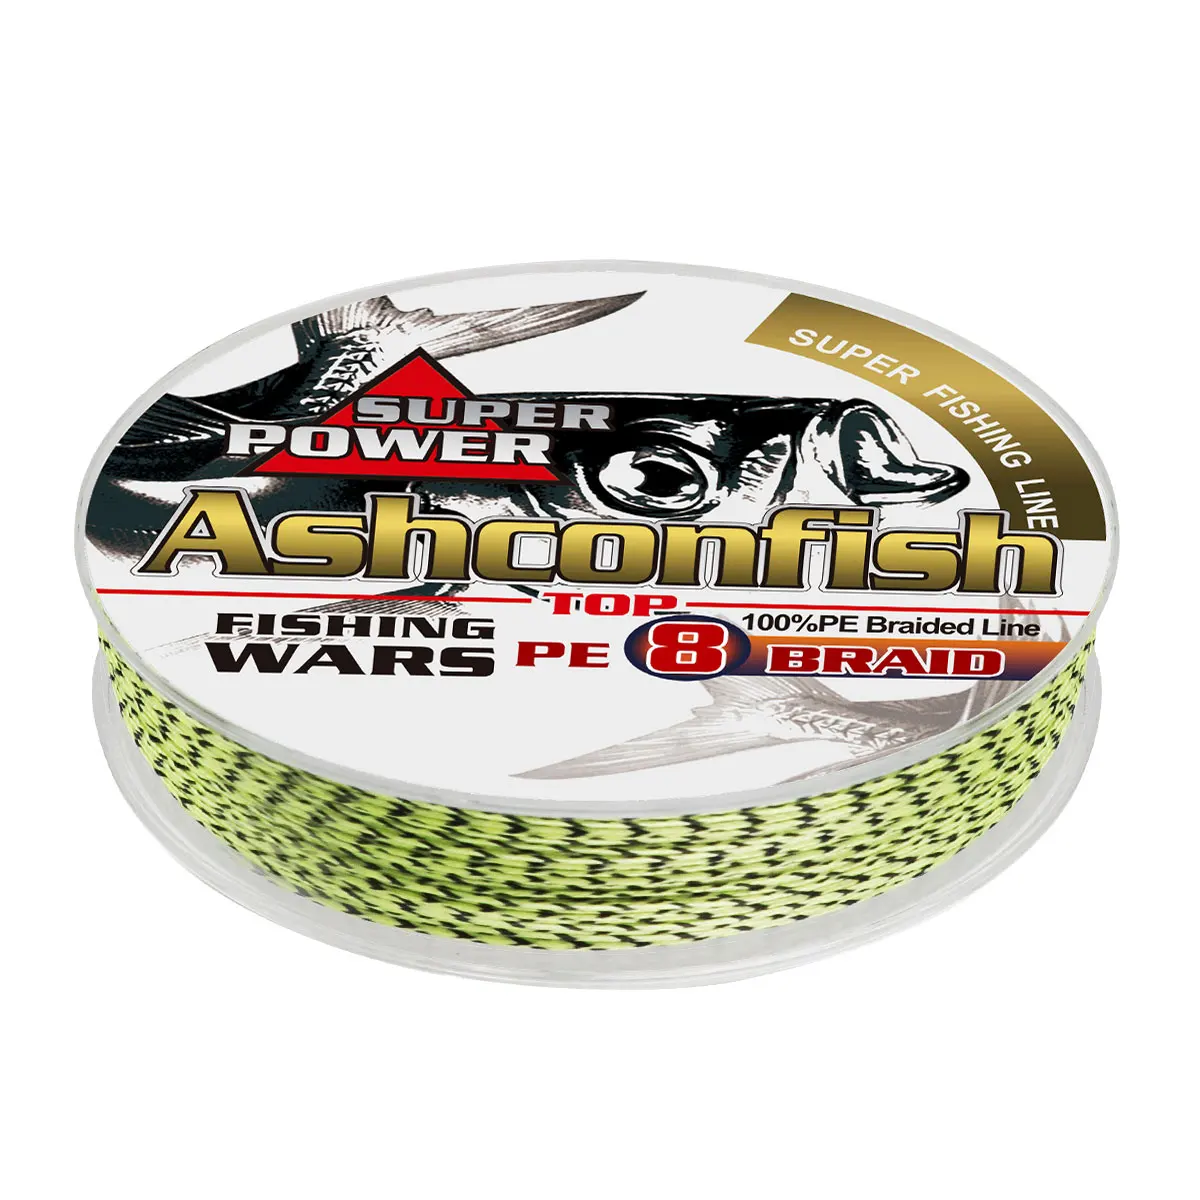 

Super braided fishing Spot line 100M 300M pe 8 braid 8-300LBS 0.12 0.2 0.3 0.4 0.5 0.63 0.68 0.8 1.0mm 8strand wires mix color